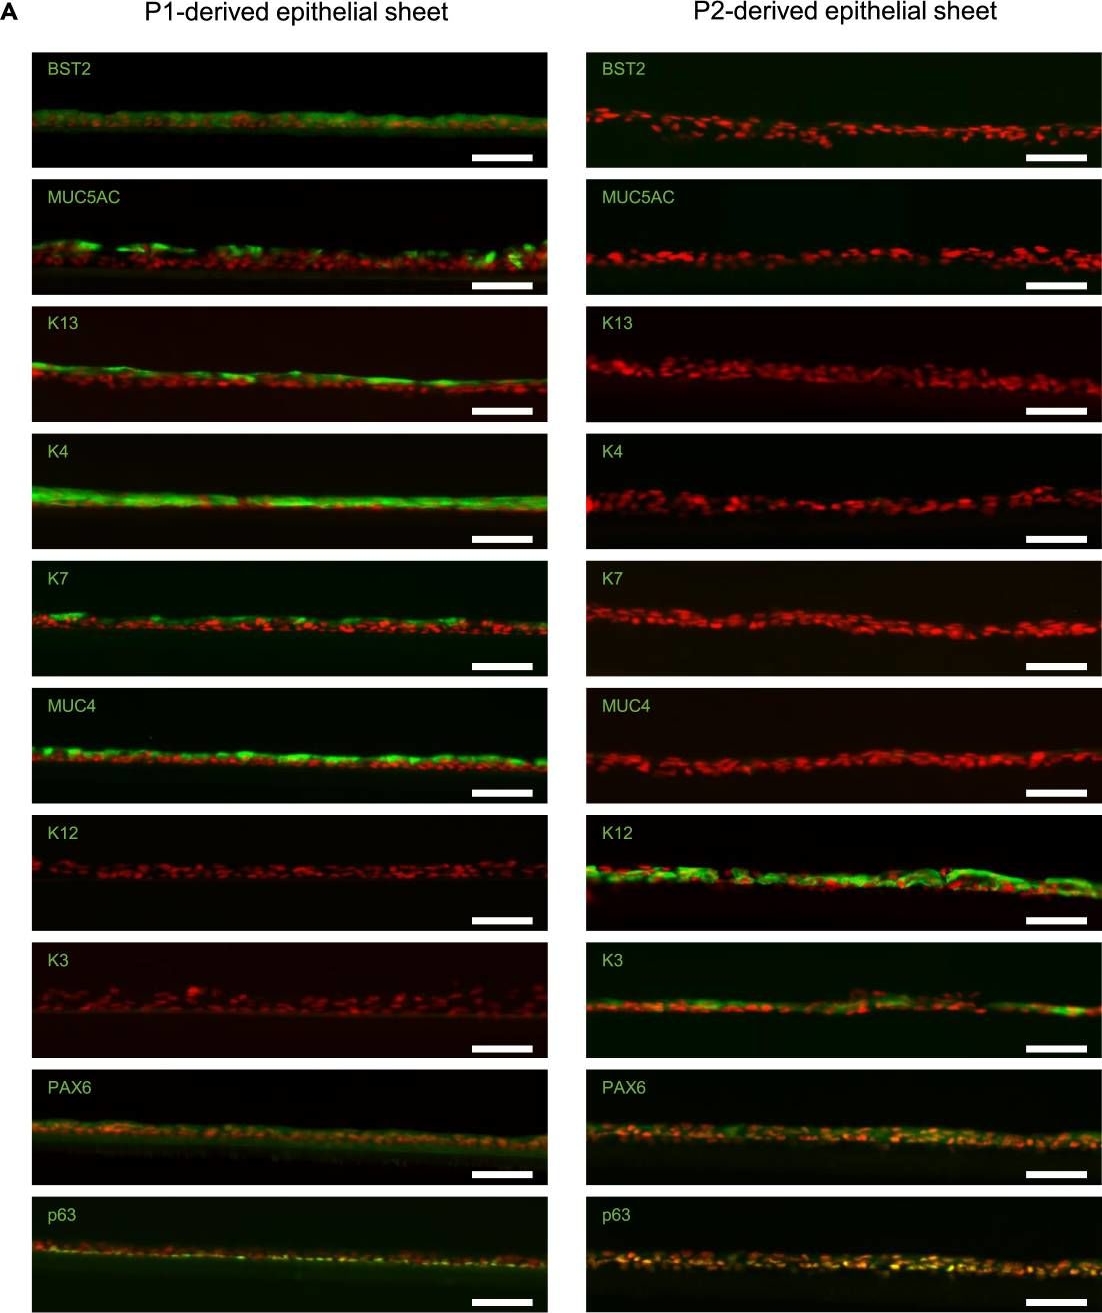 Identification of BST2 as a conjunctival epithelial stem/progenitor cell marker.